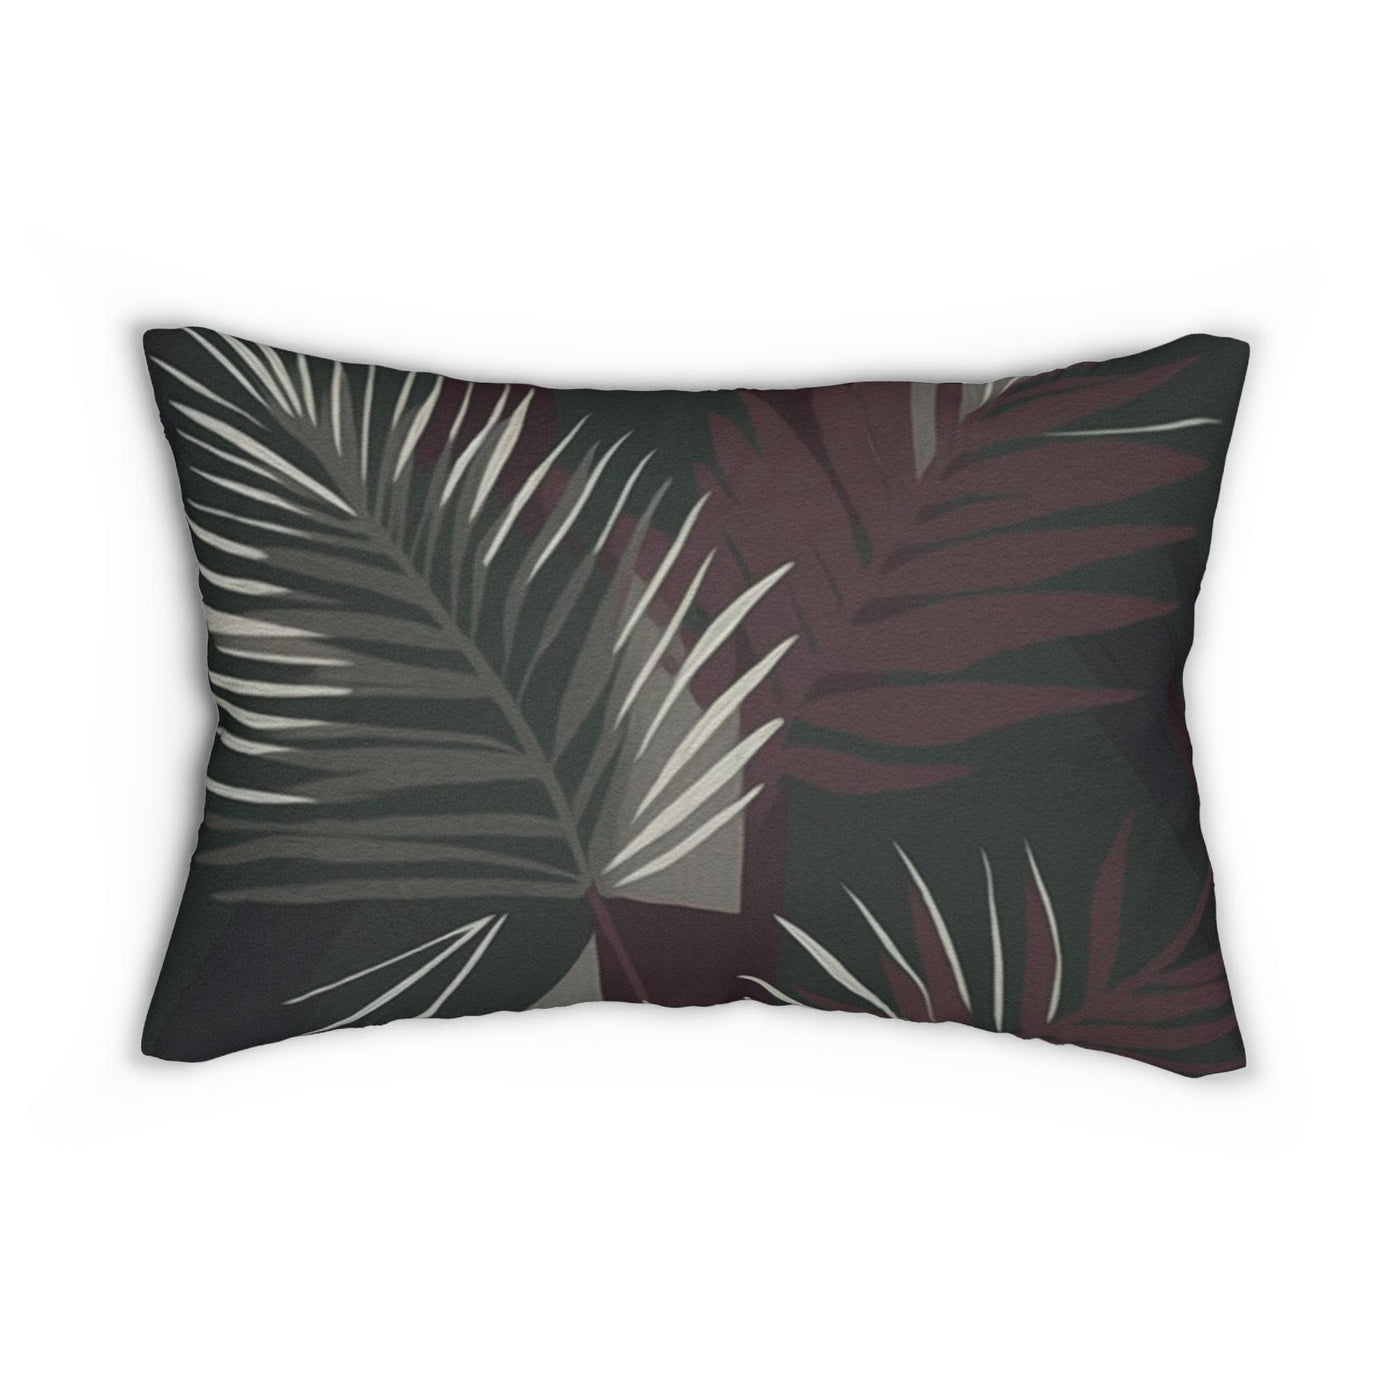 Decorative Lumbar Throw Pillow - Palm Tree Leaves Maroon Green Background